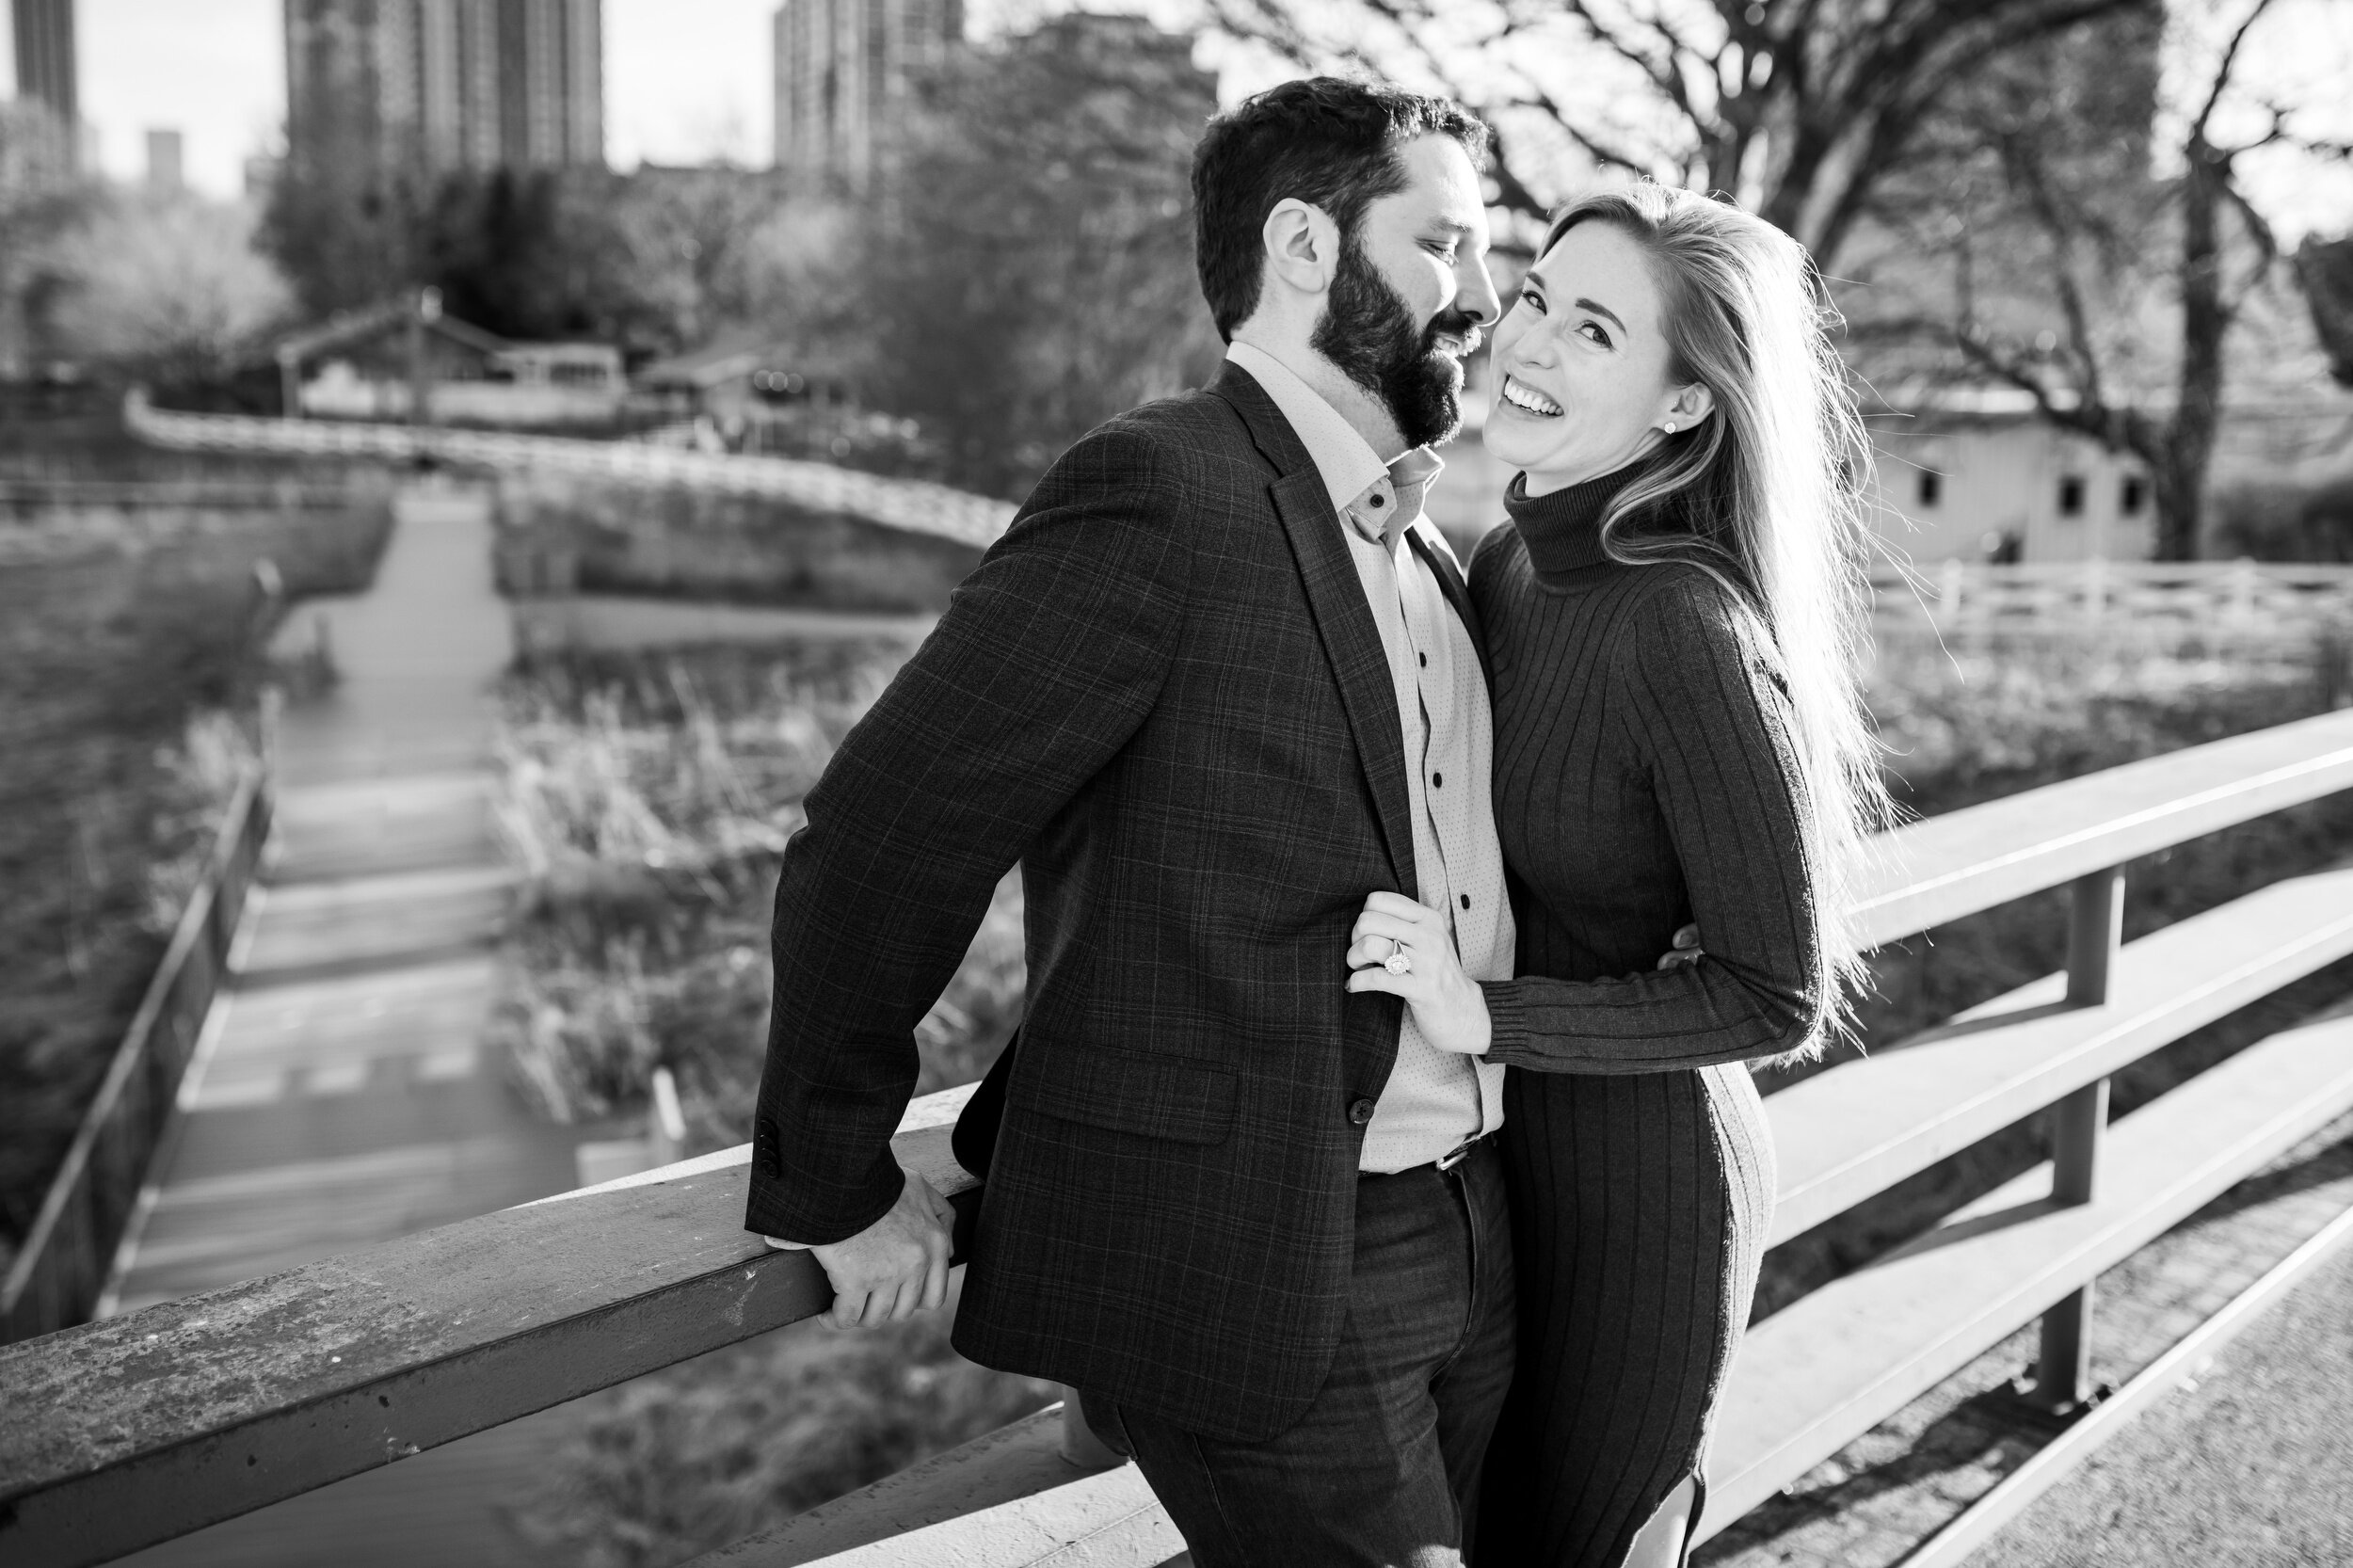 Fun moment with the couple at Lincoln Park:  Chicago engagement photo by J. Brown Photography.